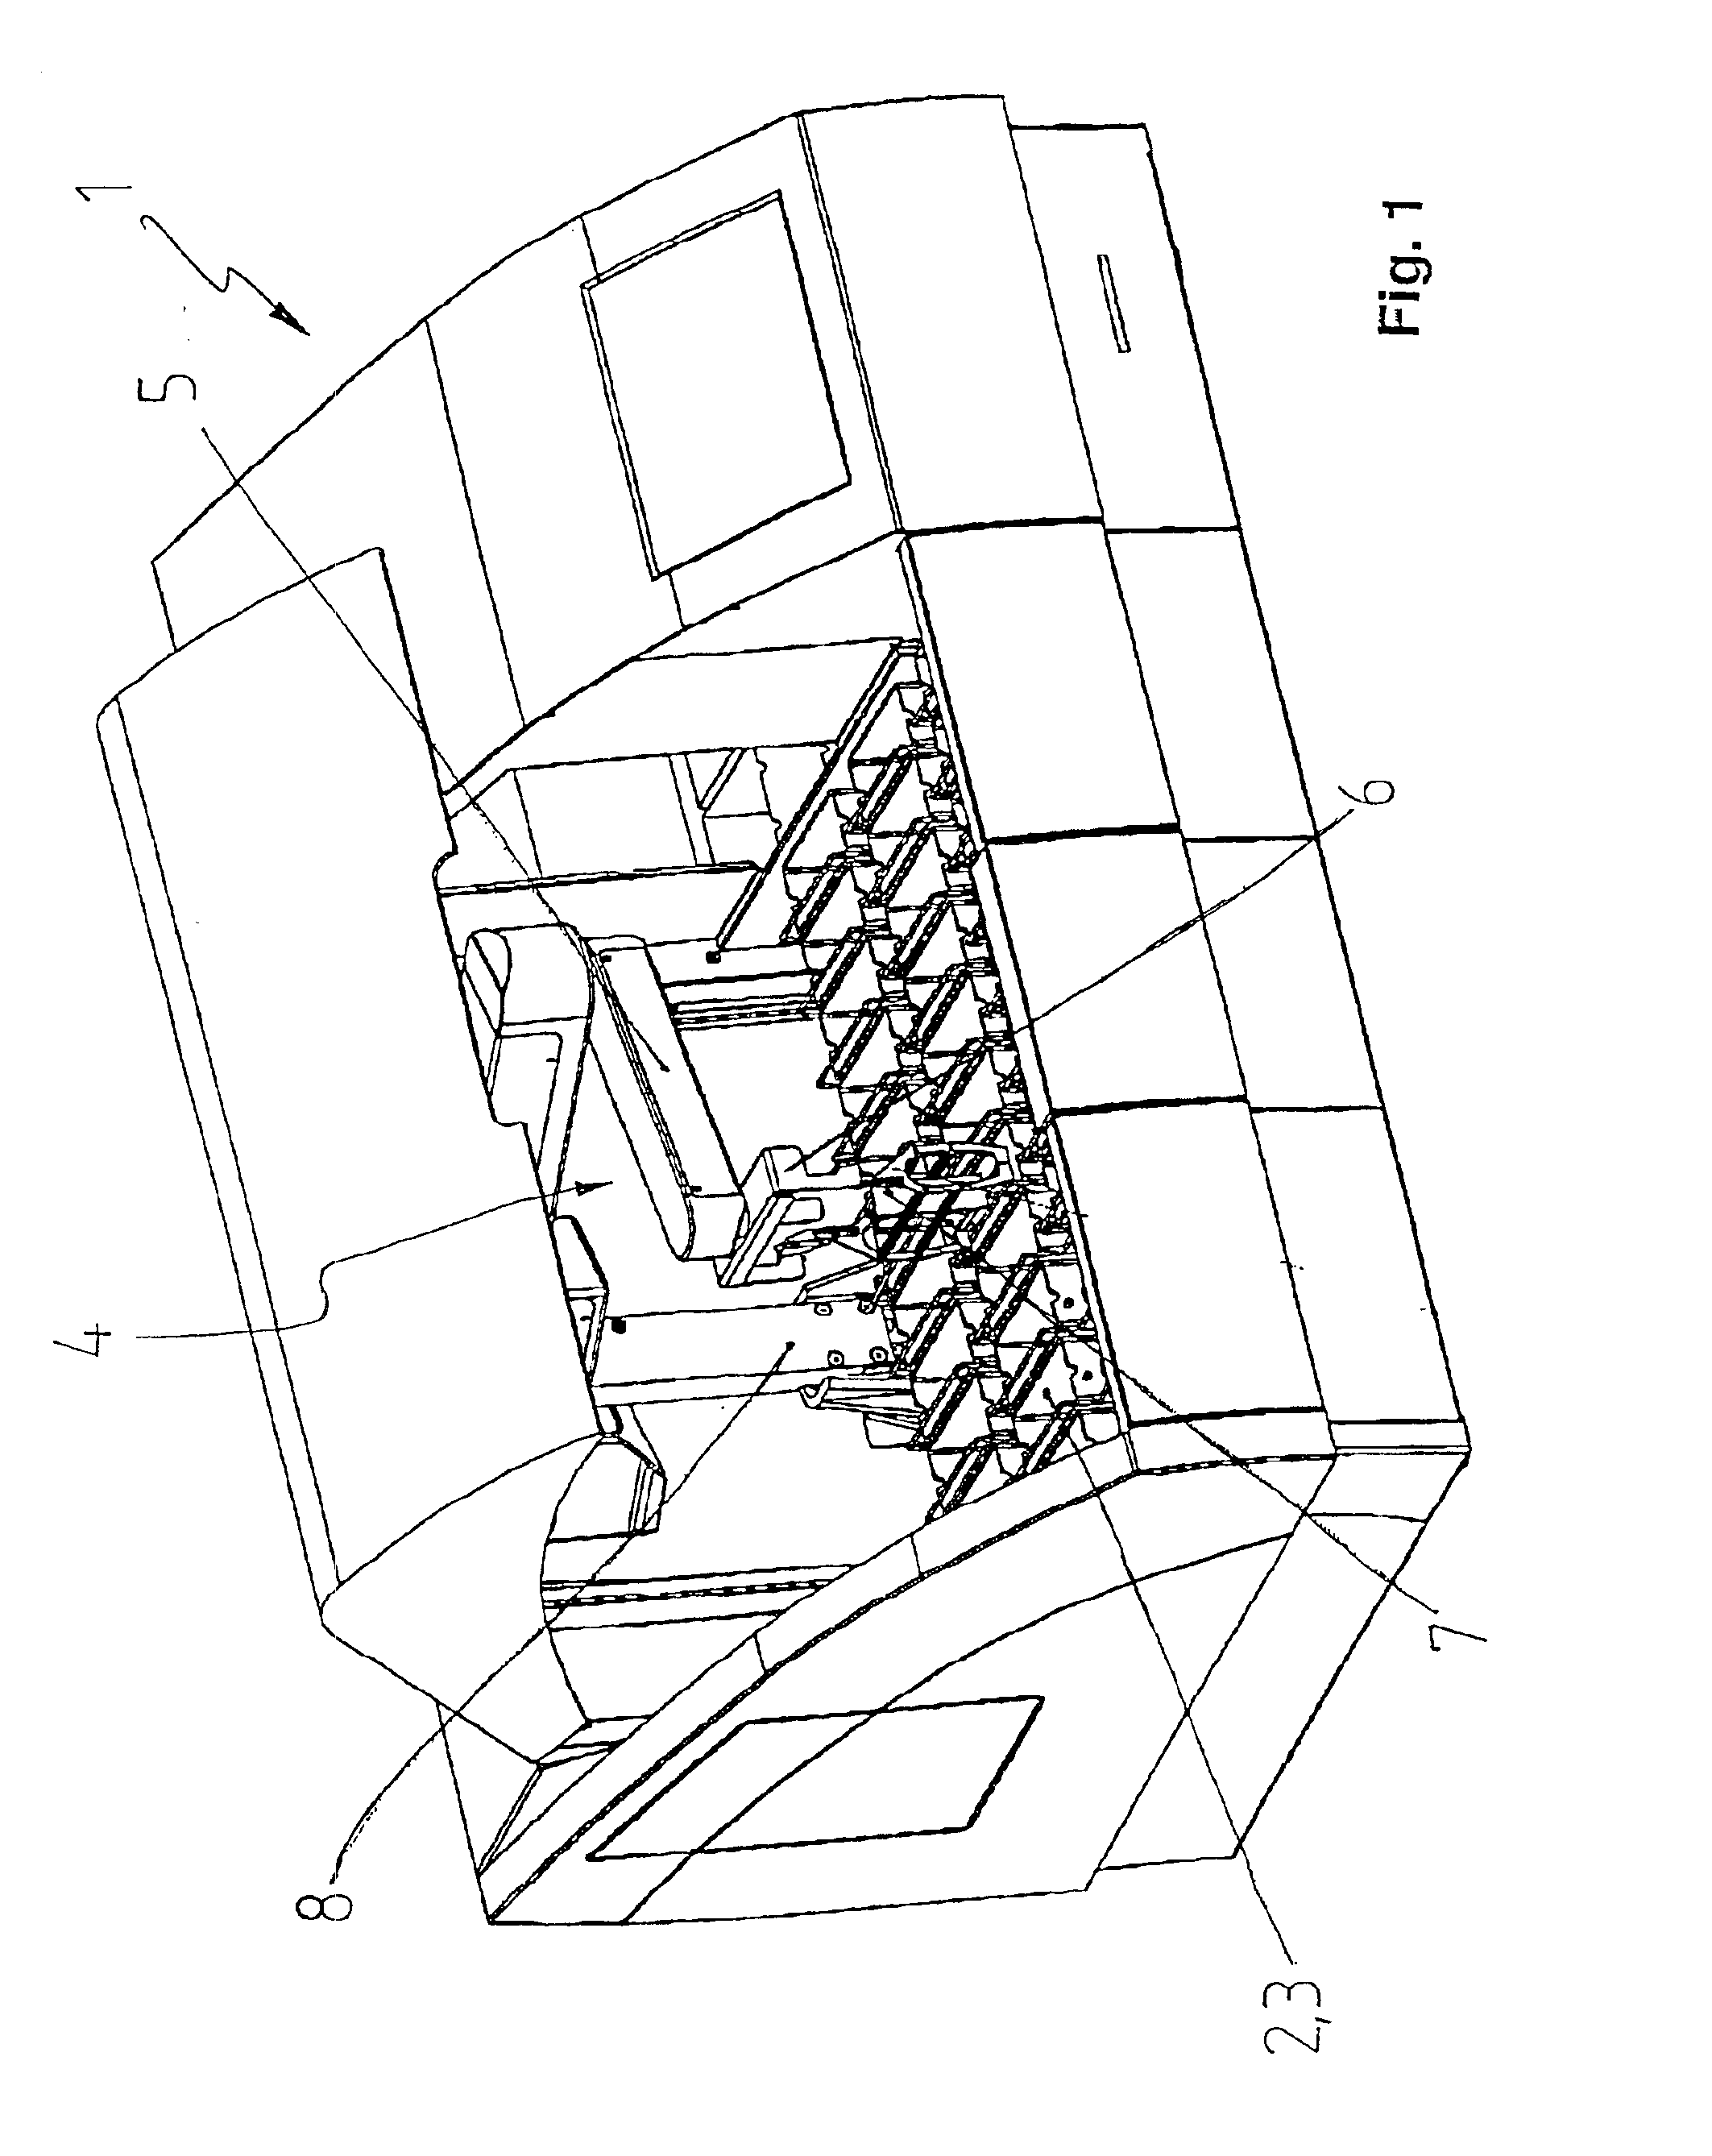 Apparatus for treating cytological or histological specimens